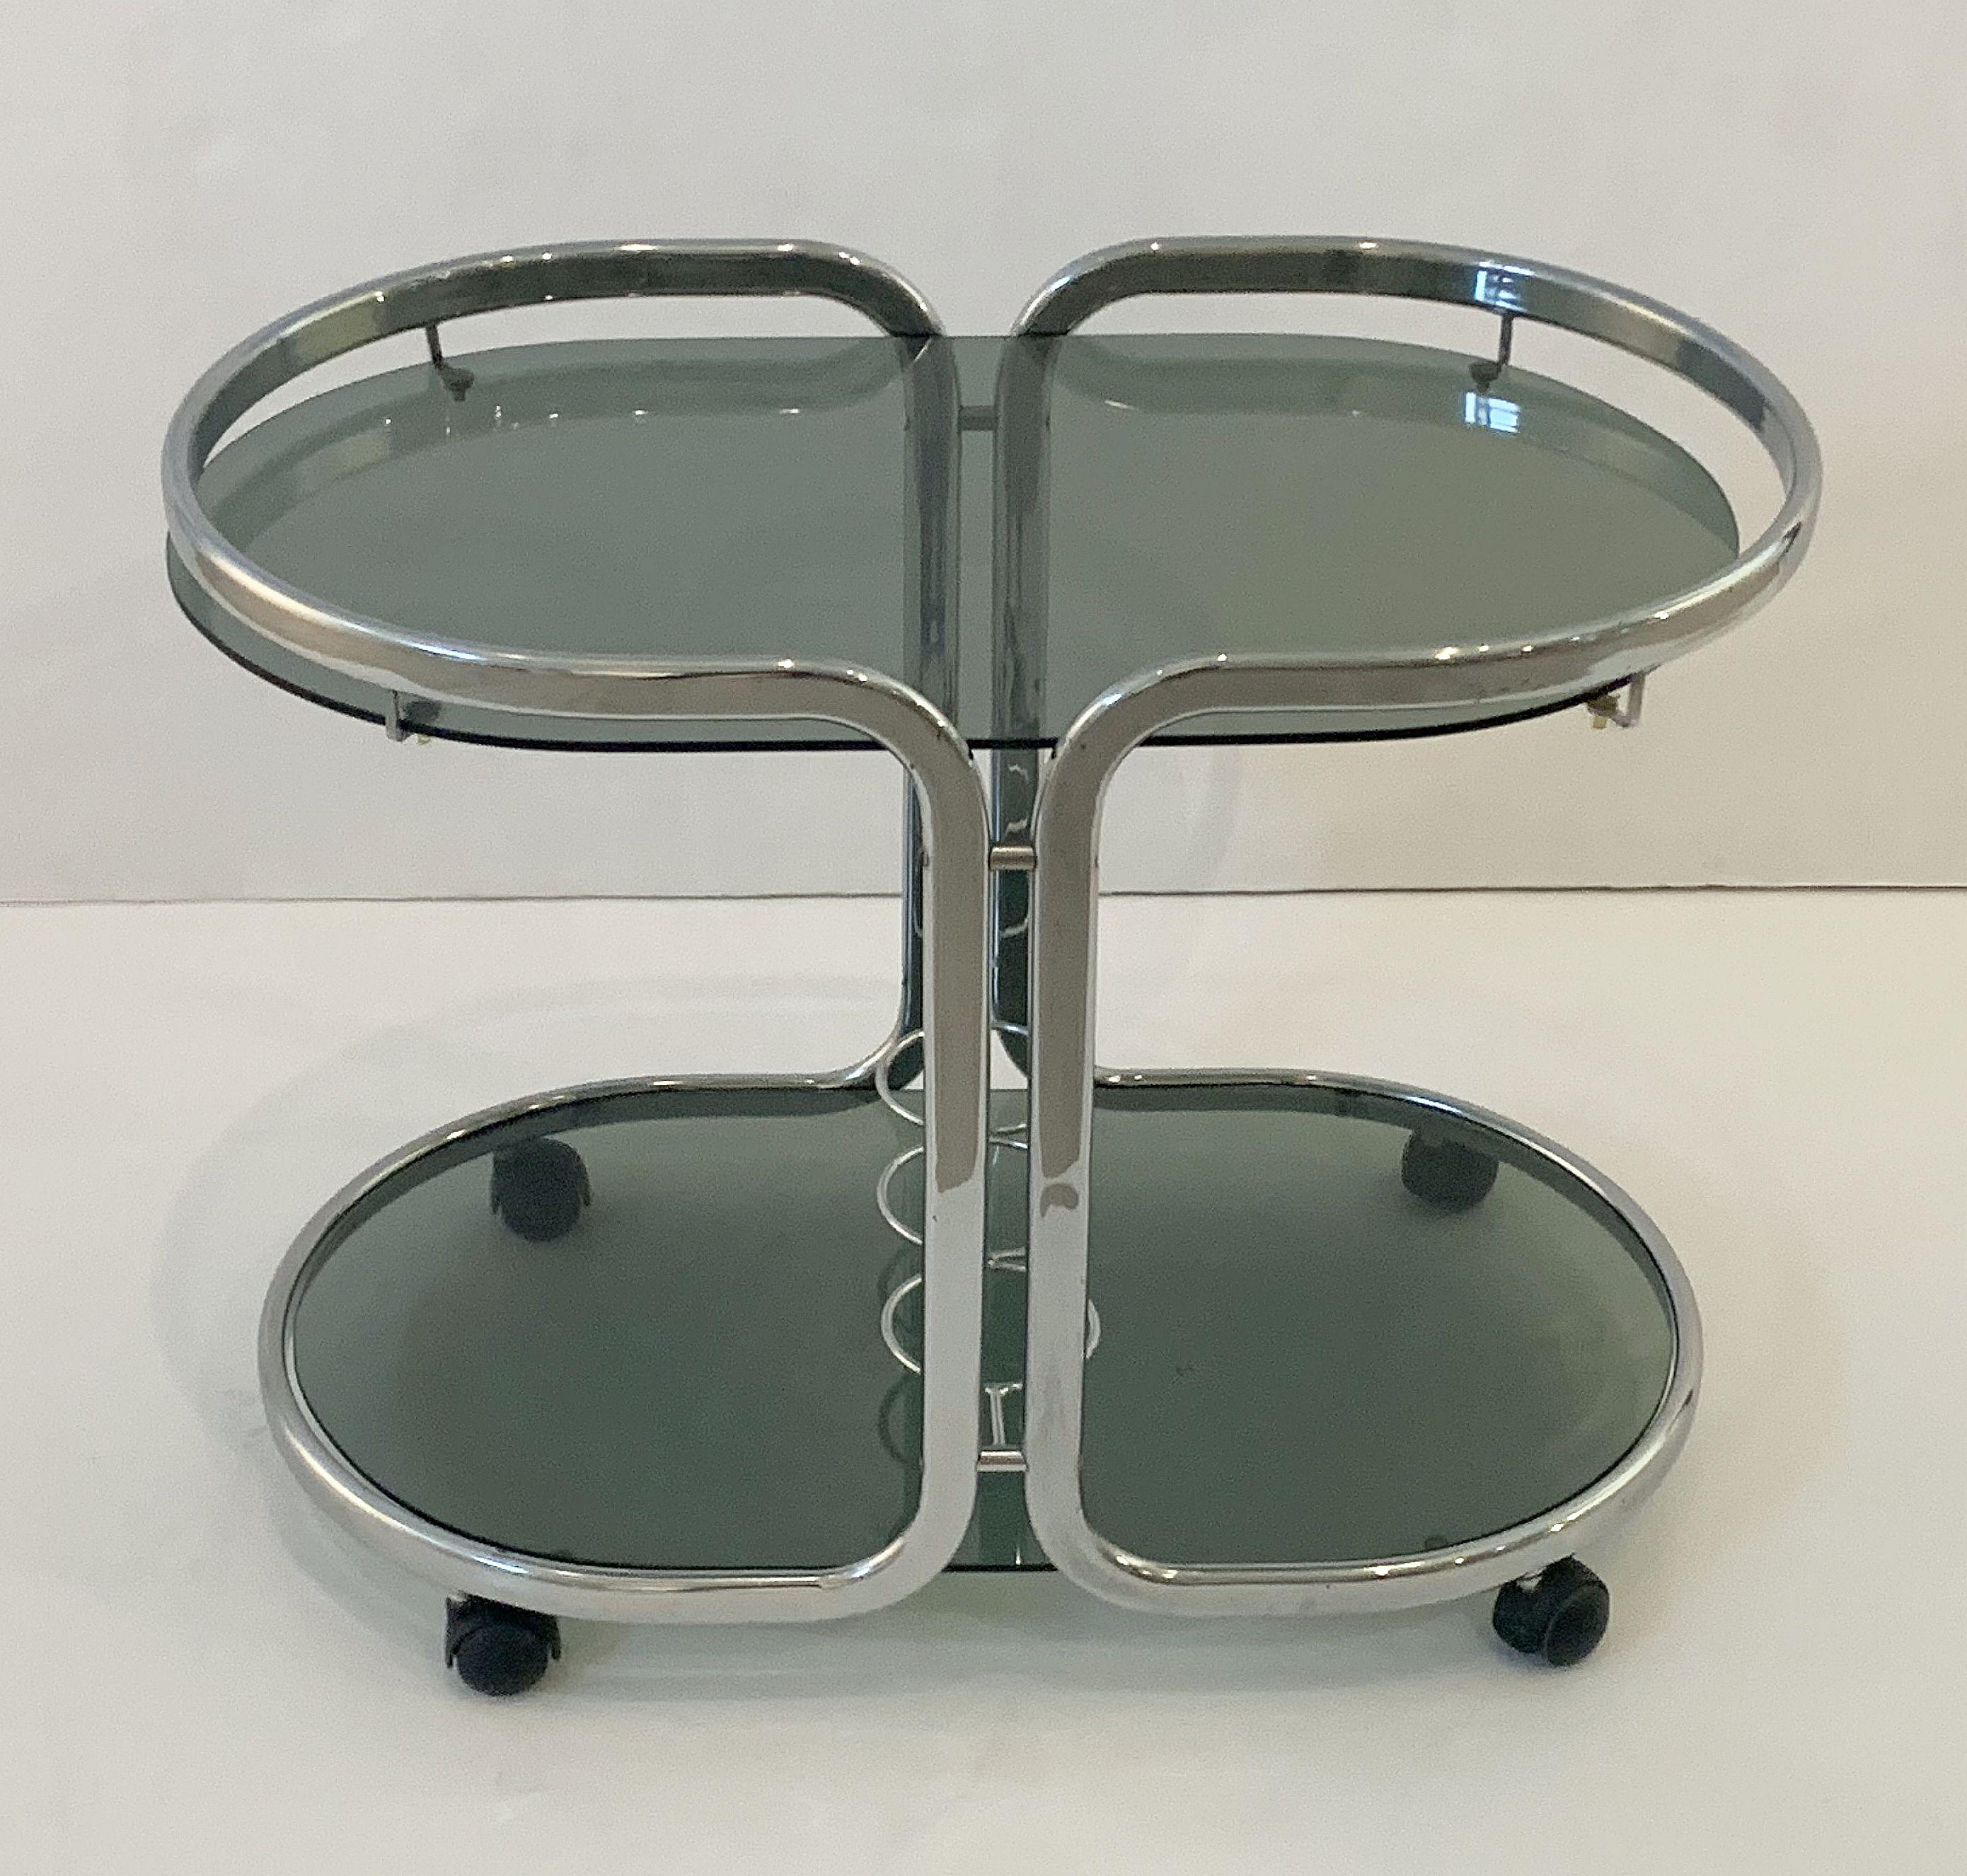 A handsome vintage French ovoid drinks cart table or bar trolley of stylish polished chrome, with two smoked glass shelves, bottle holder rack on bottom shelf, and set upon rolling casters.

 